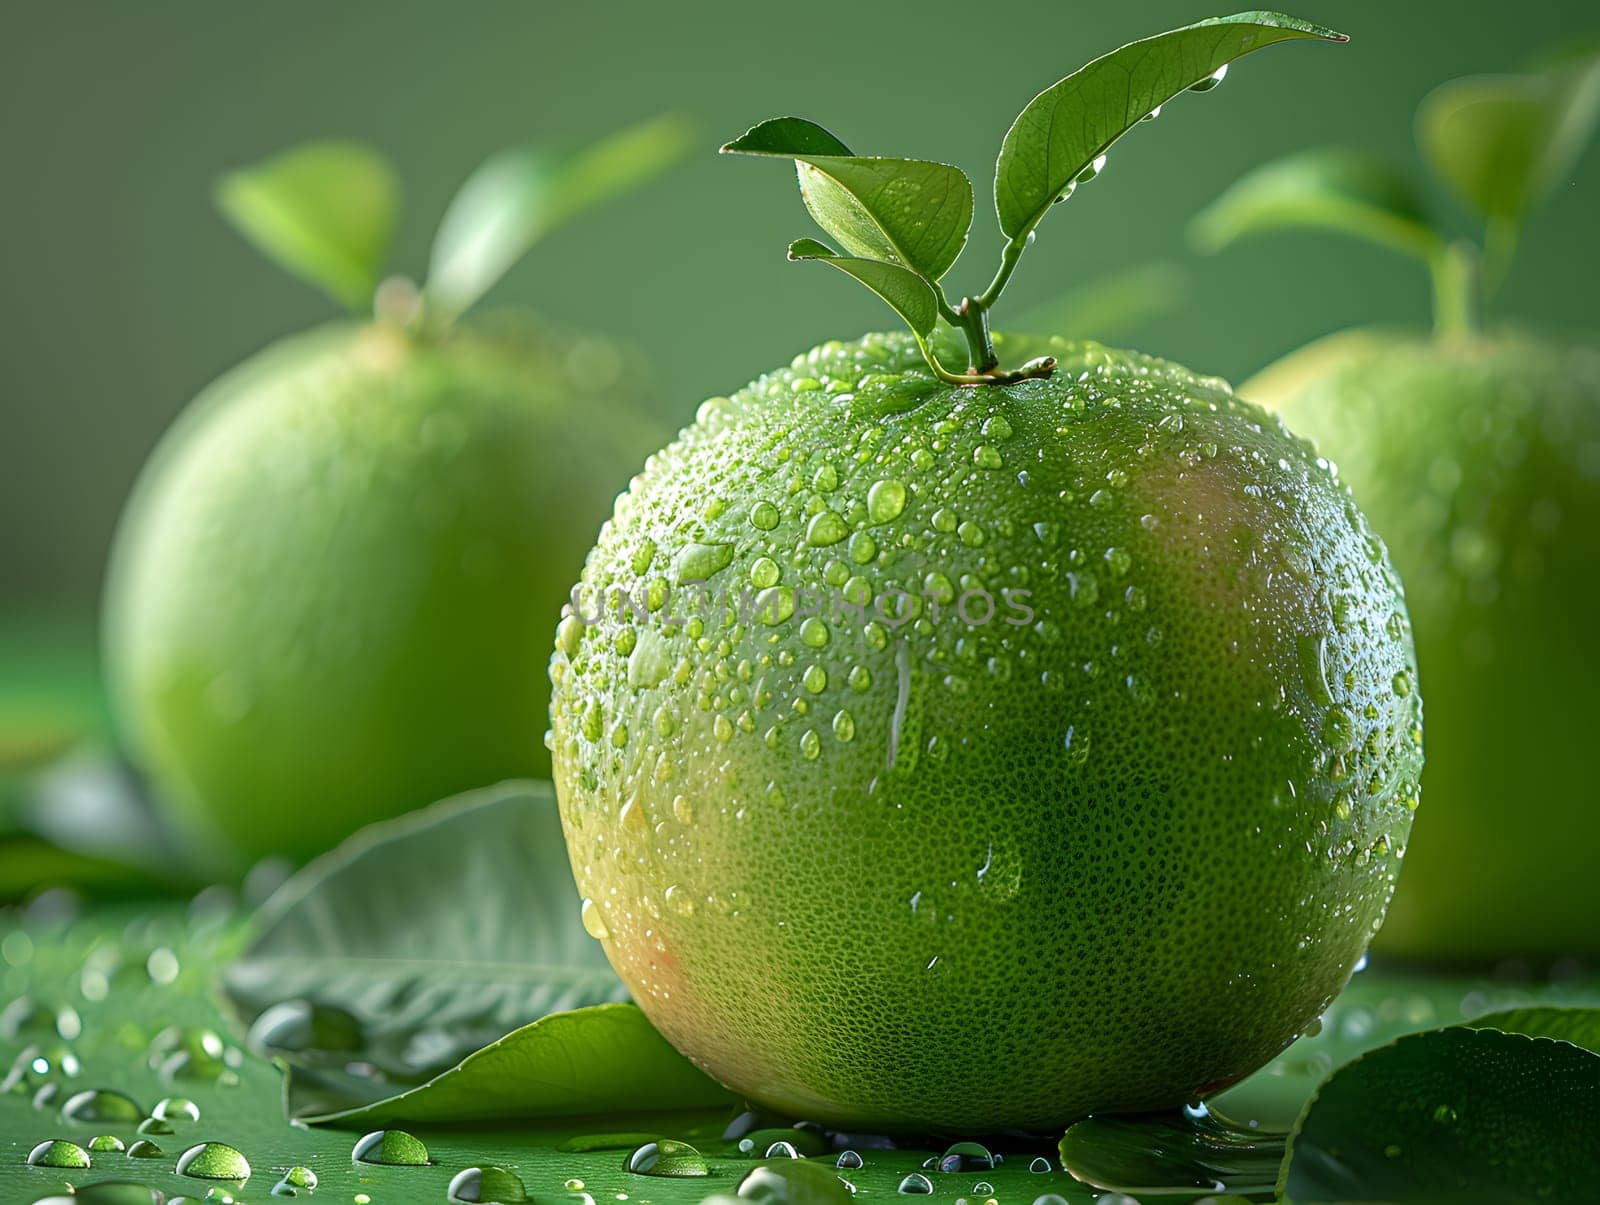 A close up of a green Rangpur lime with water drops on it, a seedless fruit that is a citrus ingredient in food and natural foods known for its sweet lemon flavor